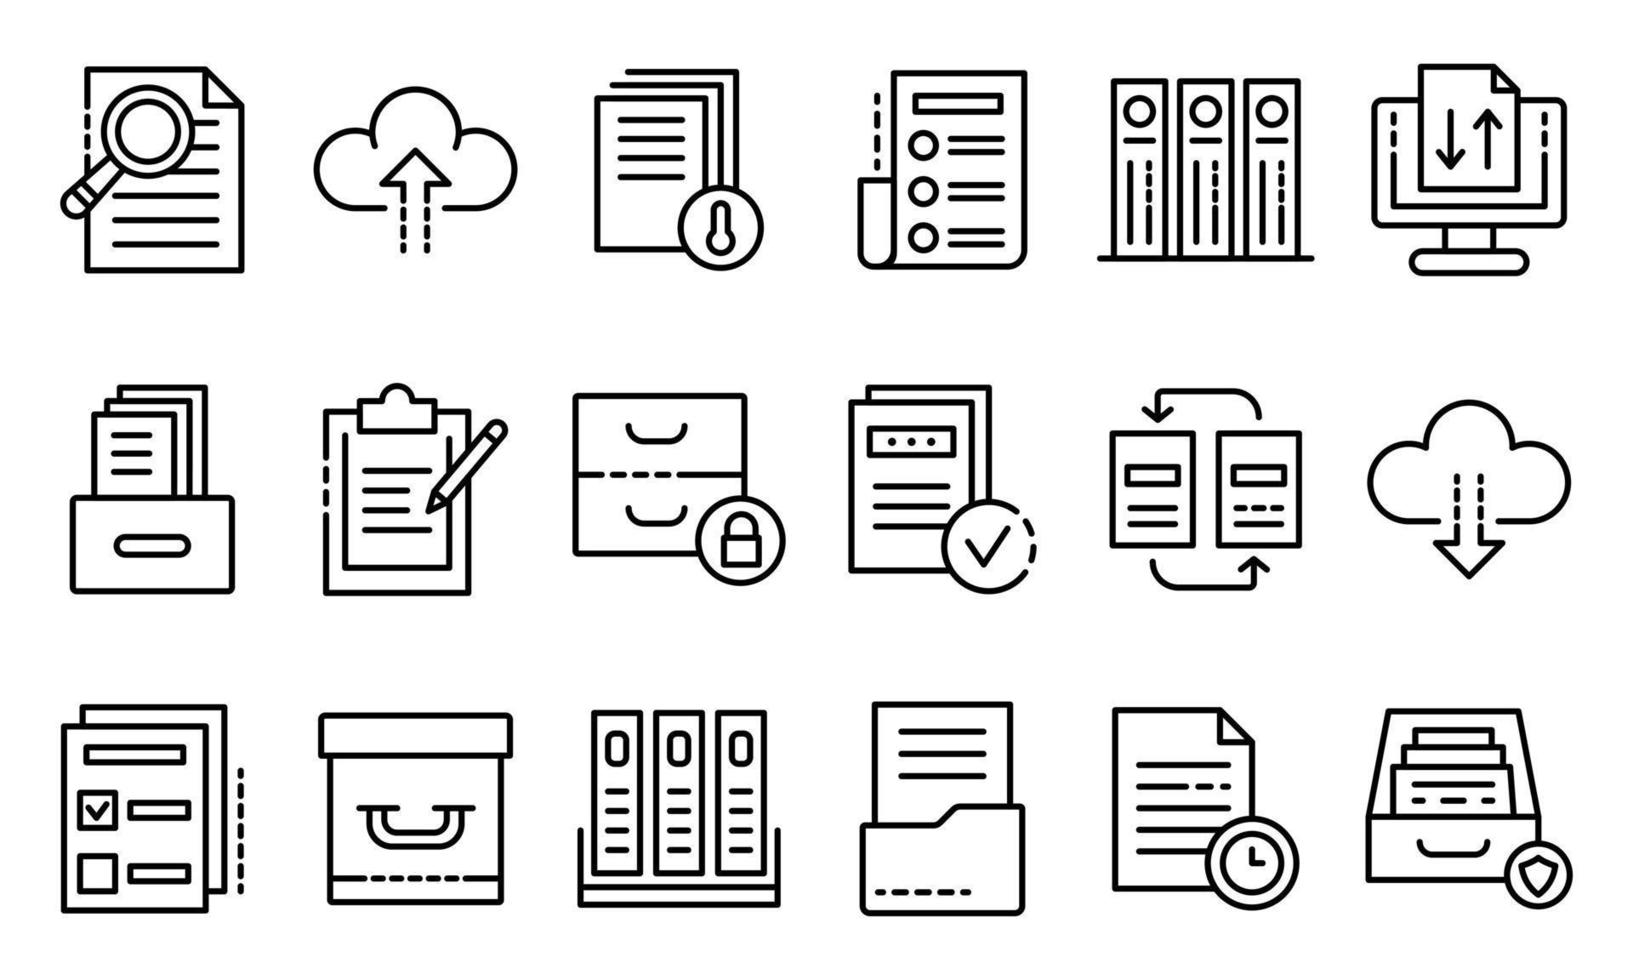 Archive icons set, outline style vector